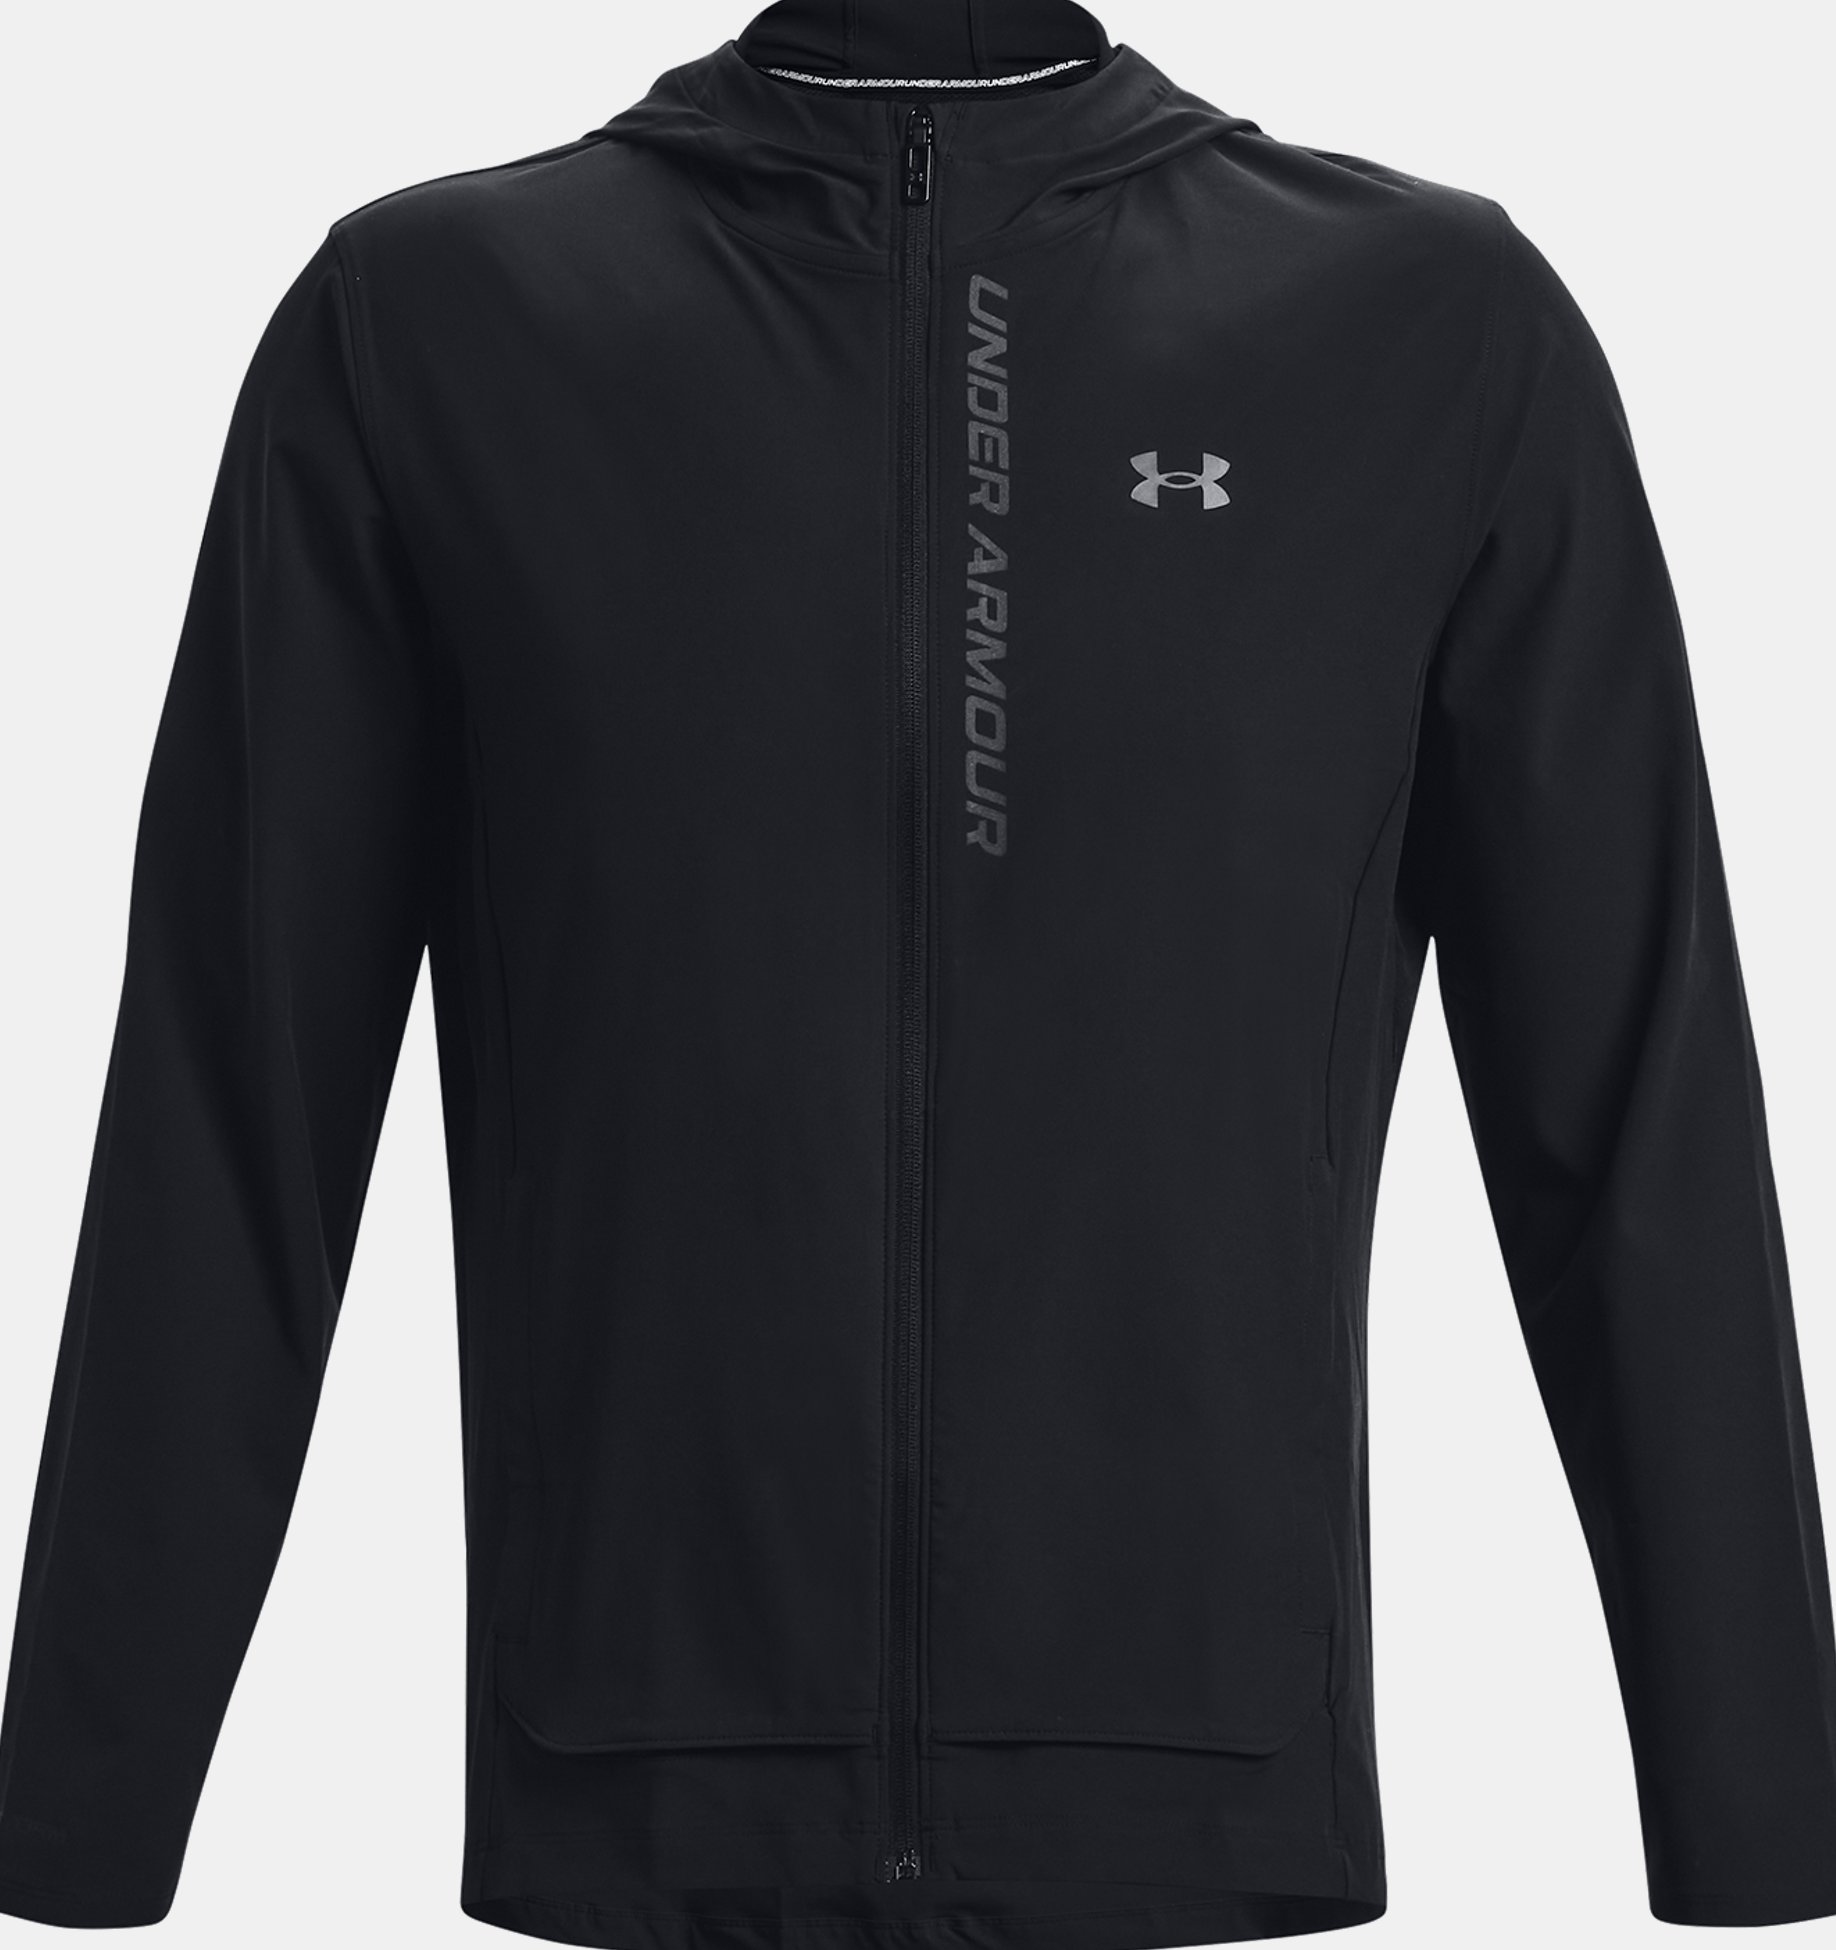 https://underarmour.scene7.com/is/image/Underarmour/PS1376794-002_HF?rp=standard-0pad|pdpZoomDesktop&scl=0.72&fmt=jpg&qlt=85&resMode=sharp2&cache=on,on&bgc=f0f0f0&wid=1836&hei=1950&size=1500,1500